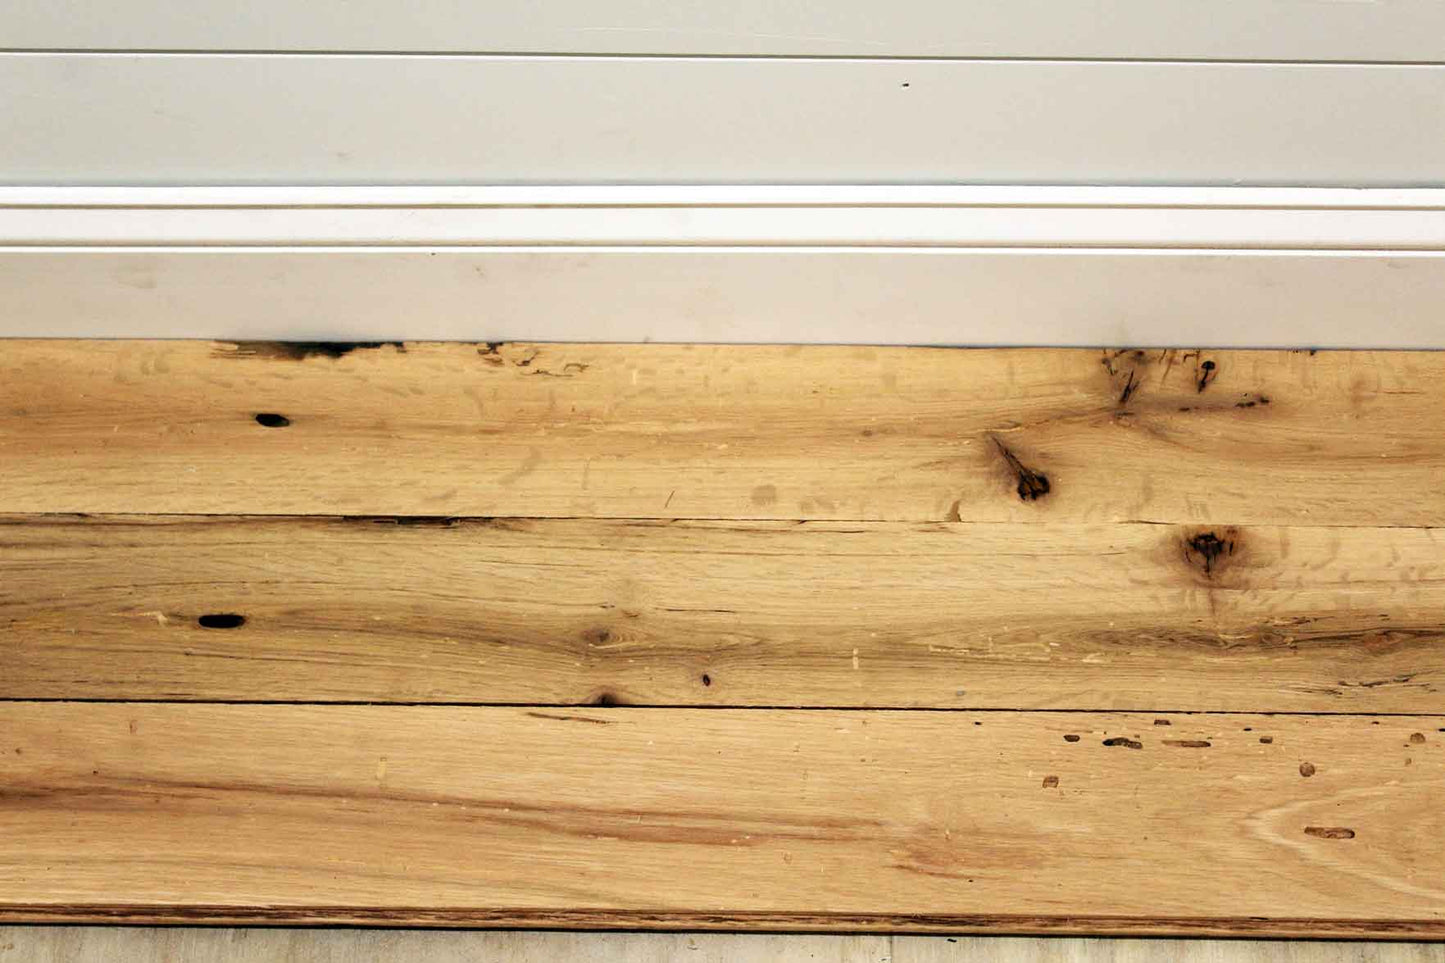 red oak reclaimed flooring installed with baseboard molding. Variations in wood color and grain pattern, knots, and characteristics from previous bug activity shown.